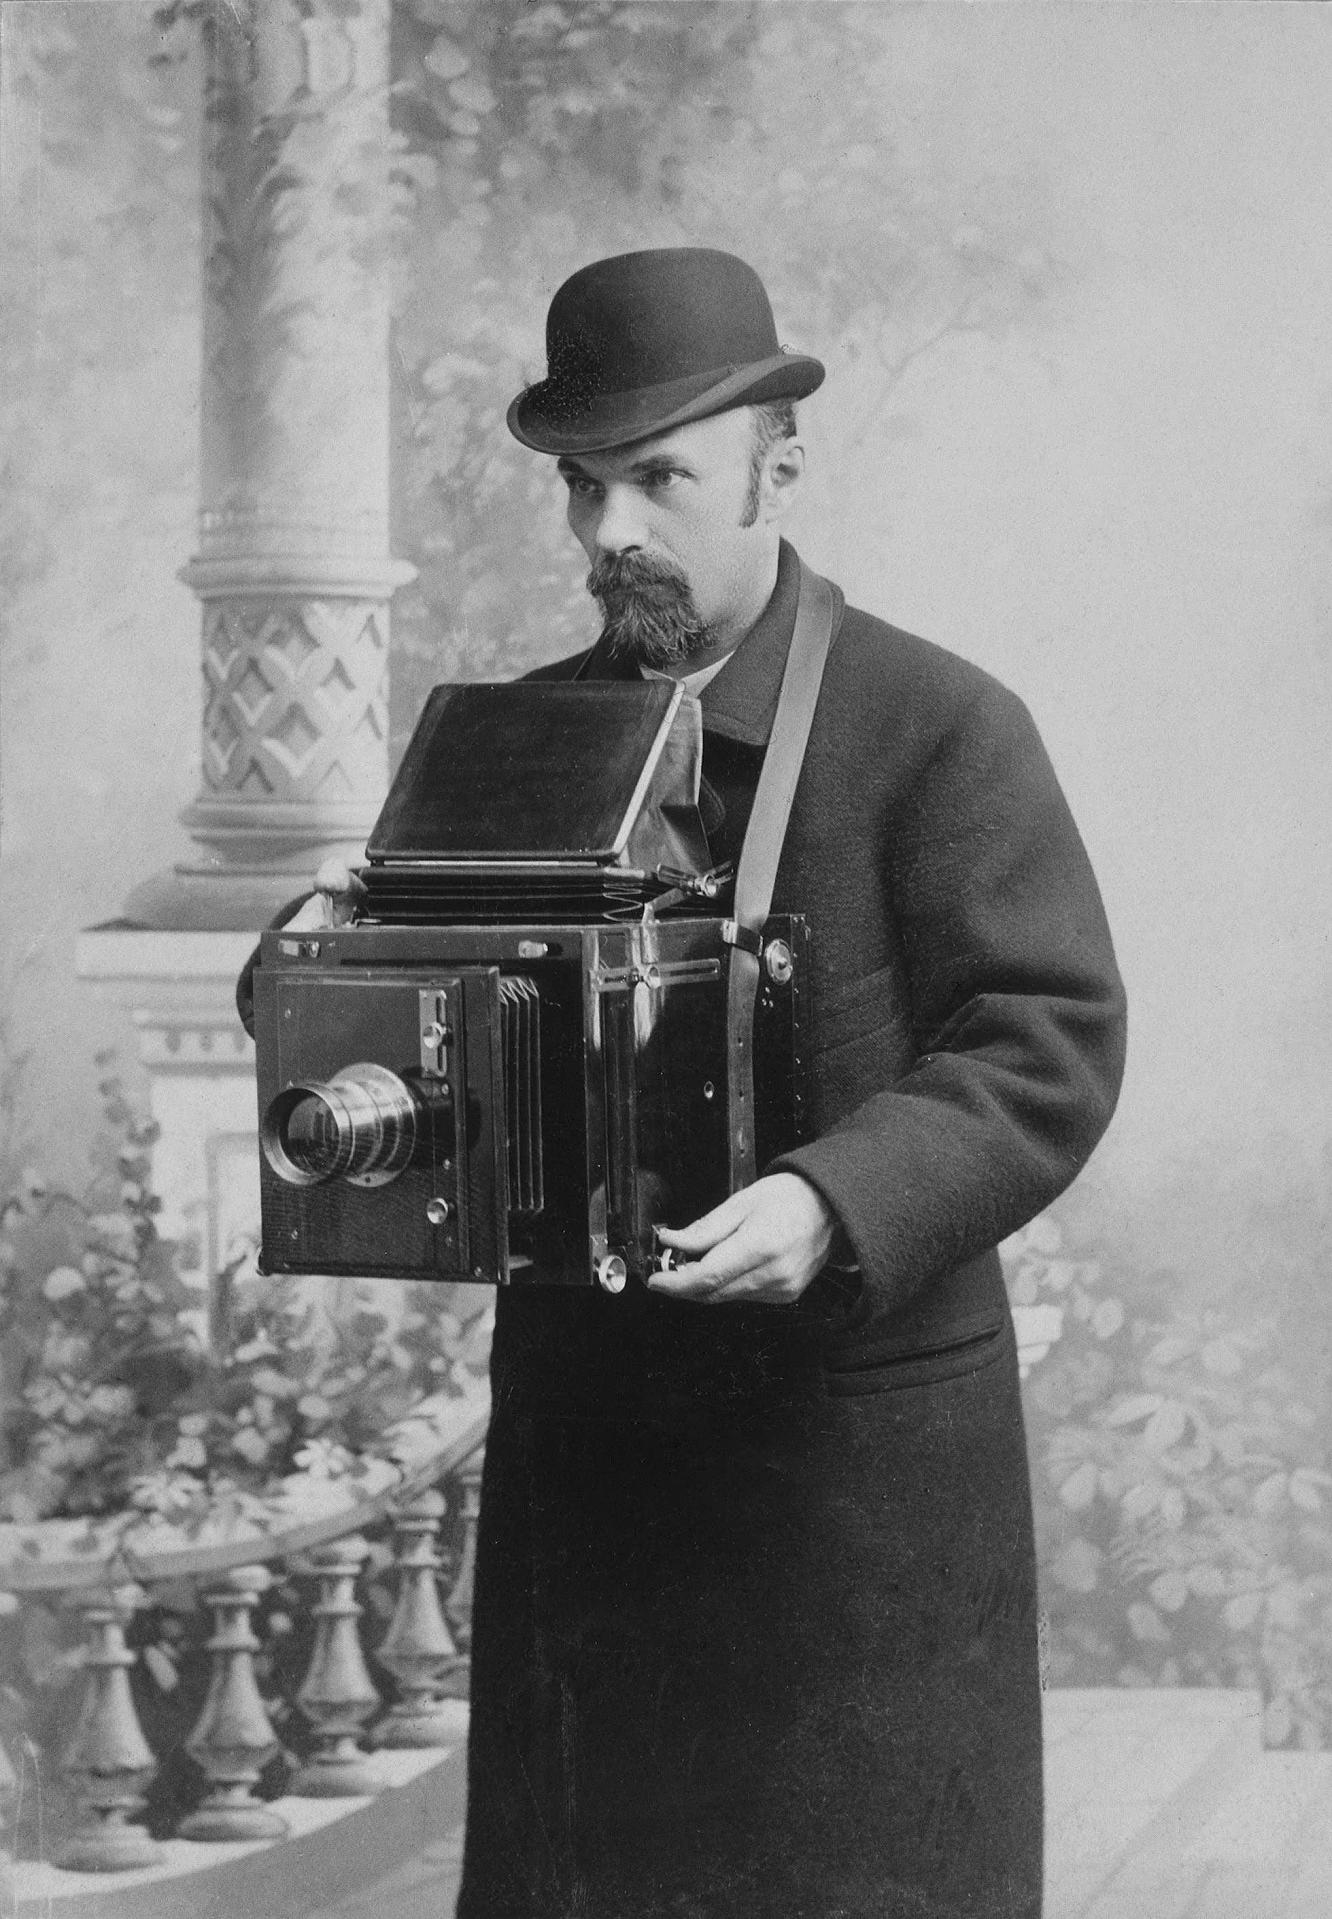 Karl Bulla can be considered St. Petersburg’s main photographer. His works captured the city’s great people at the turn of the 20th century and its historic facades, some of which were even used for restoration purposes. // Karl Bulla, self-portrait, 1917